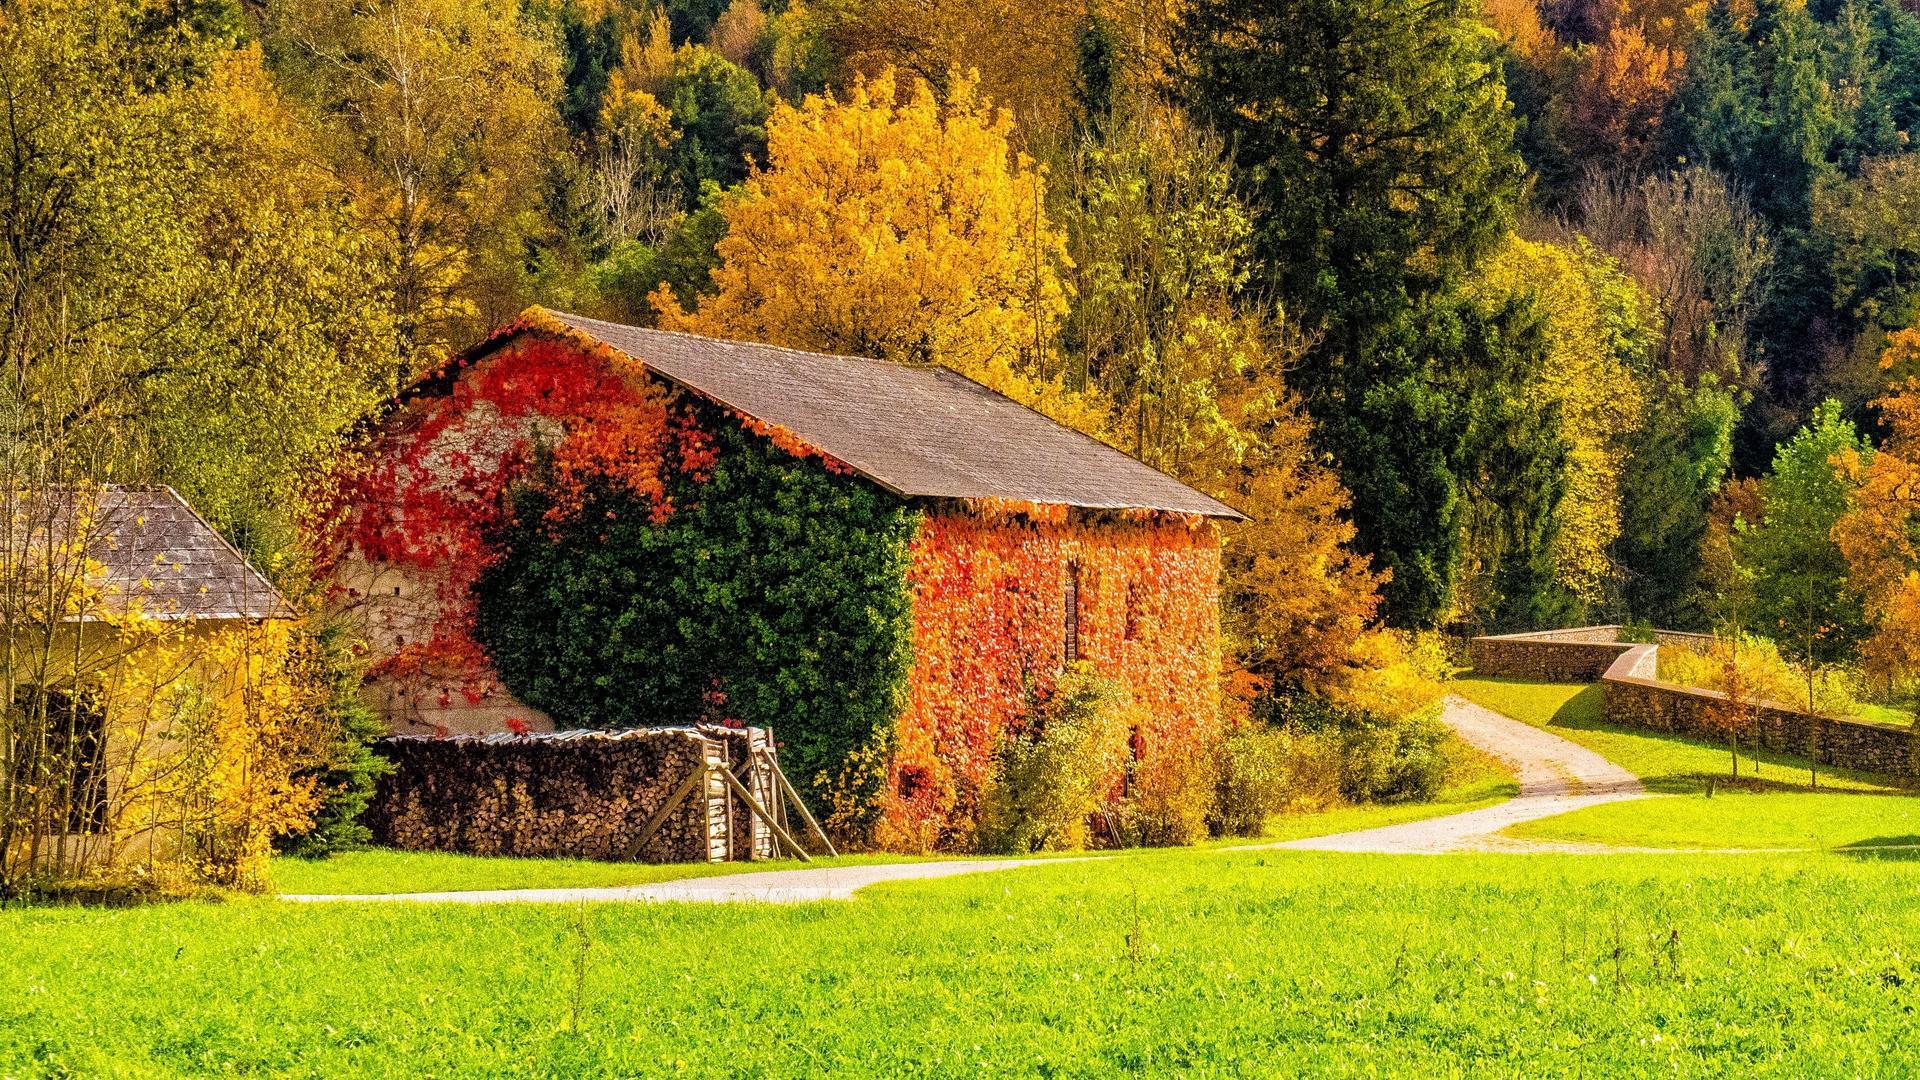 Green Grass and Old Cottage Autumn Nature Wallpaper